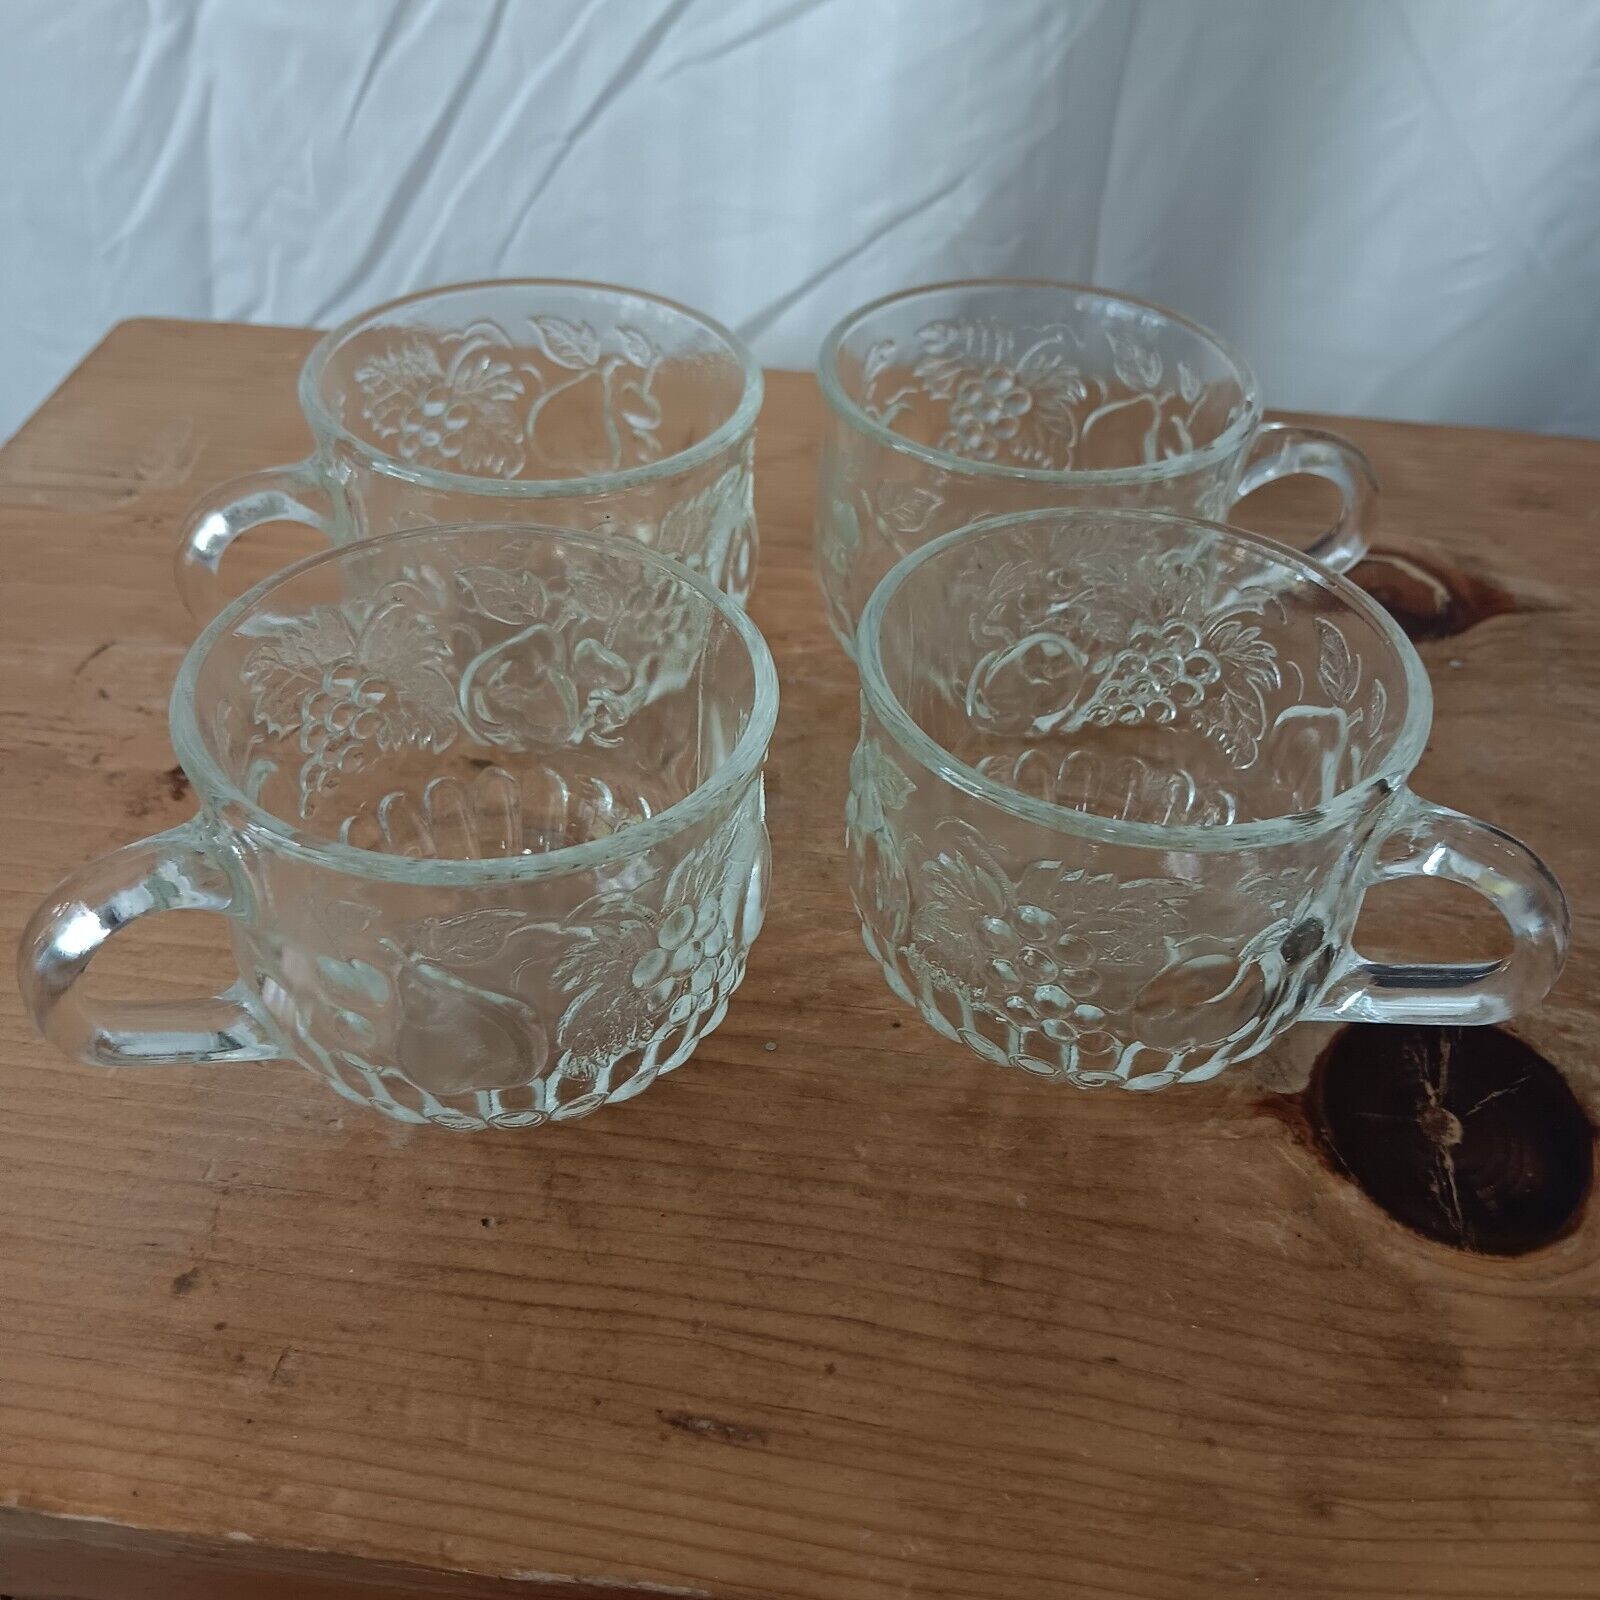 Vintage set of 12 clear glass fruit themed Punch Bowl cups